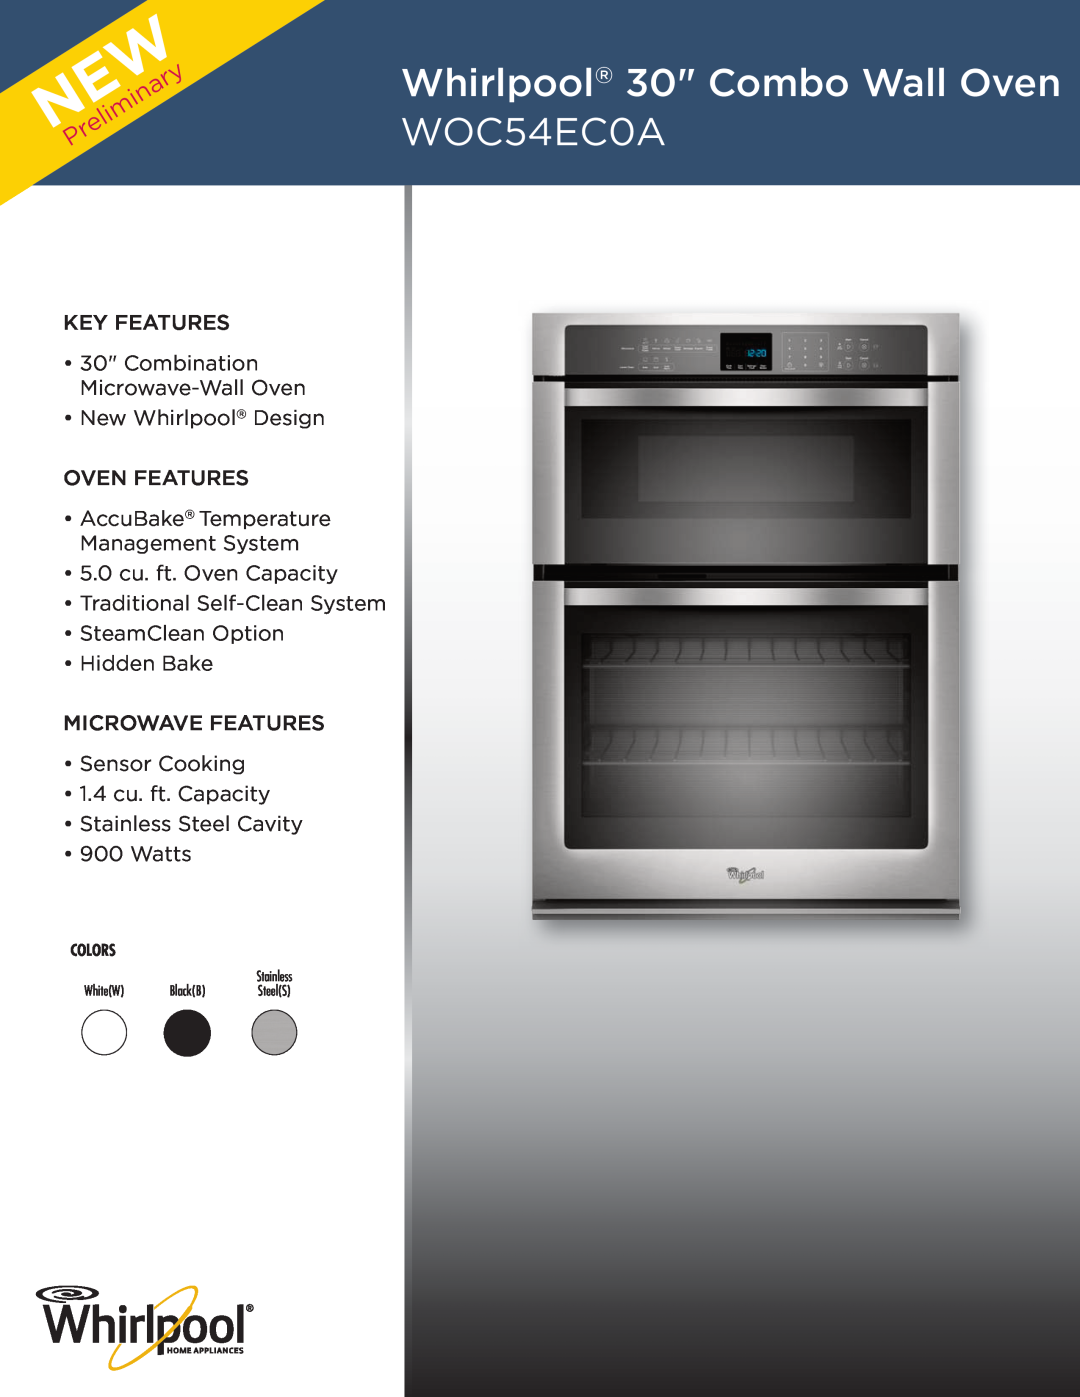 Whirlpool WOS51EC0A Whirlpool 30 Combo Wall Oven WOC54EC0A, oven features AccuBake Temperature Management System, Colors 